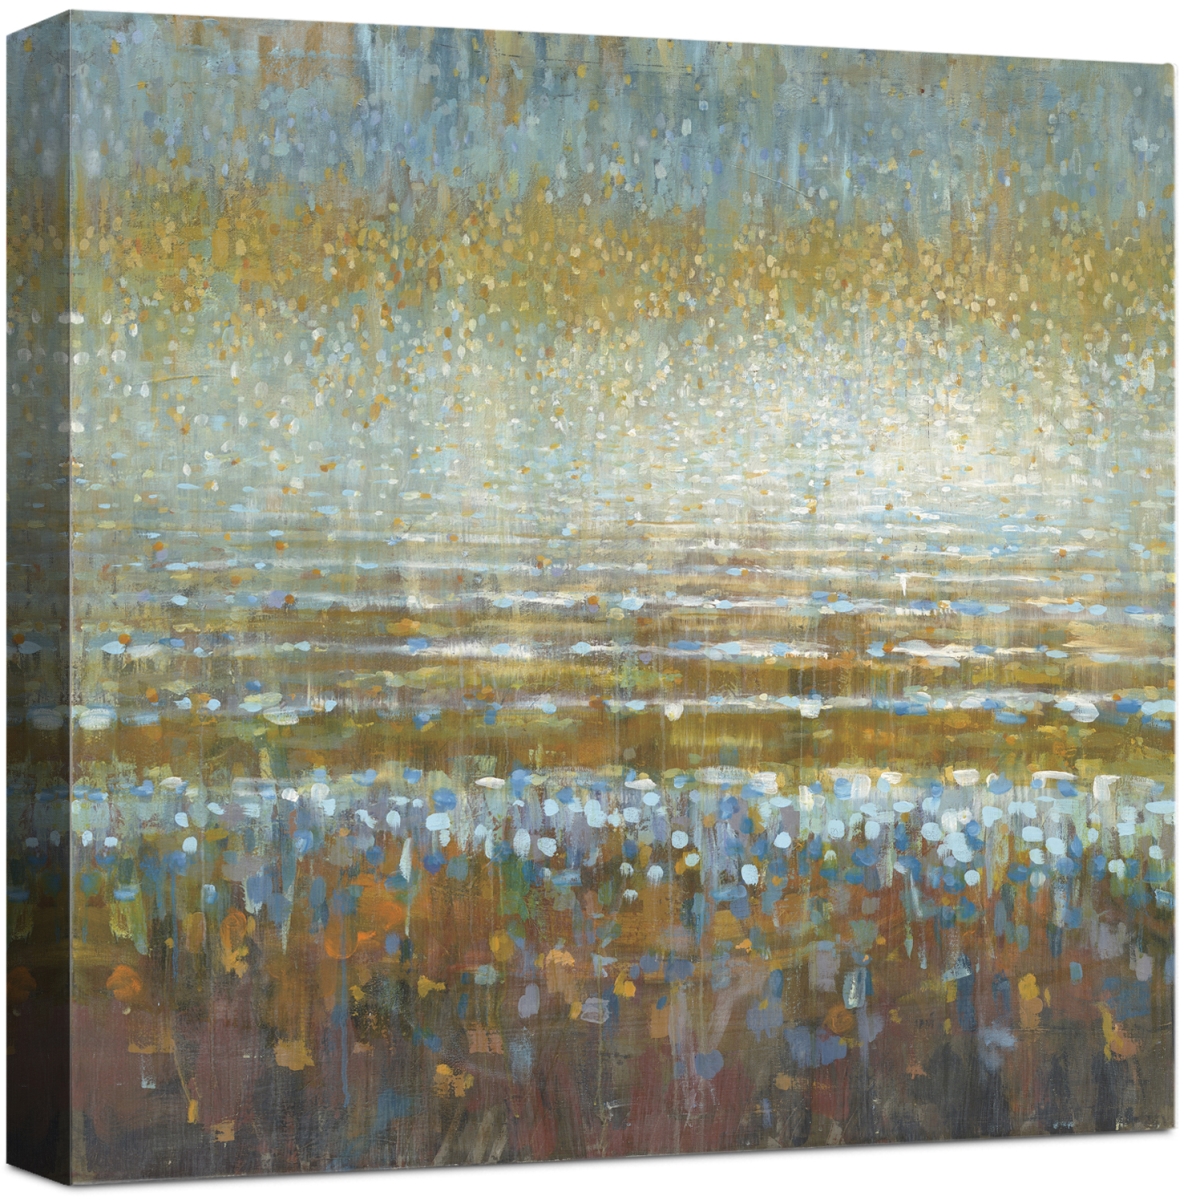 5781 Rains Over The Lake, Wrapped Giclee Canvas Art